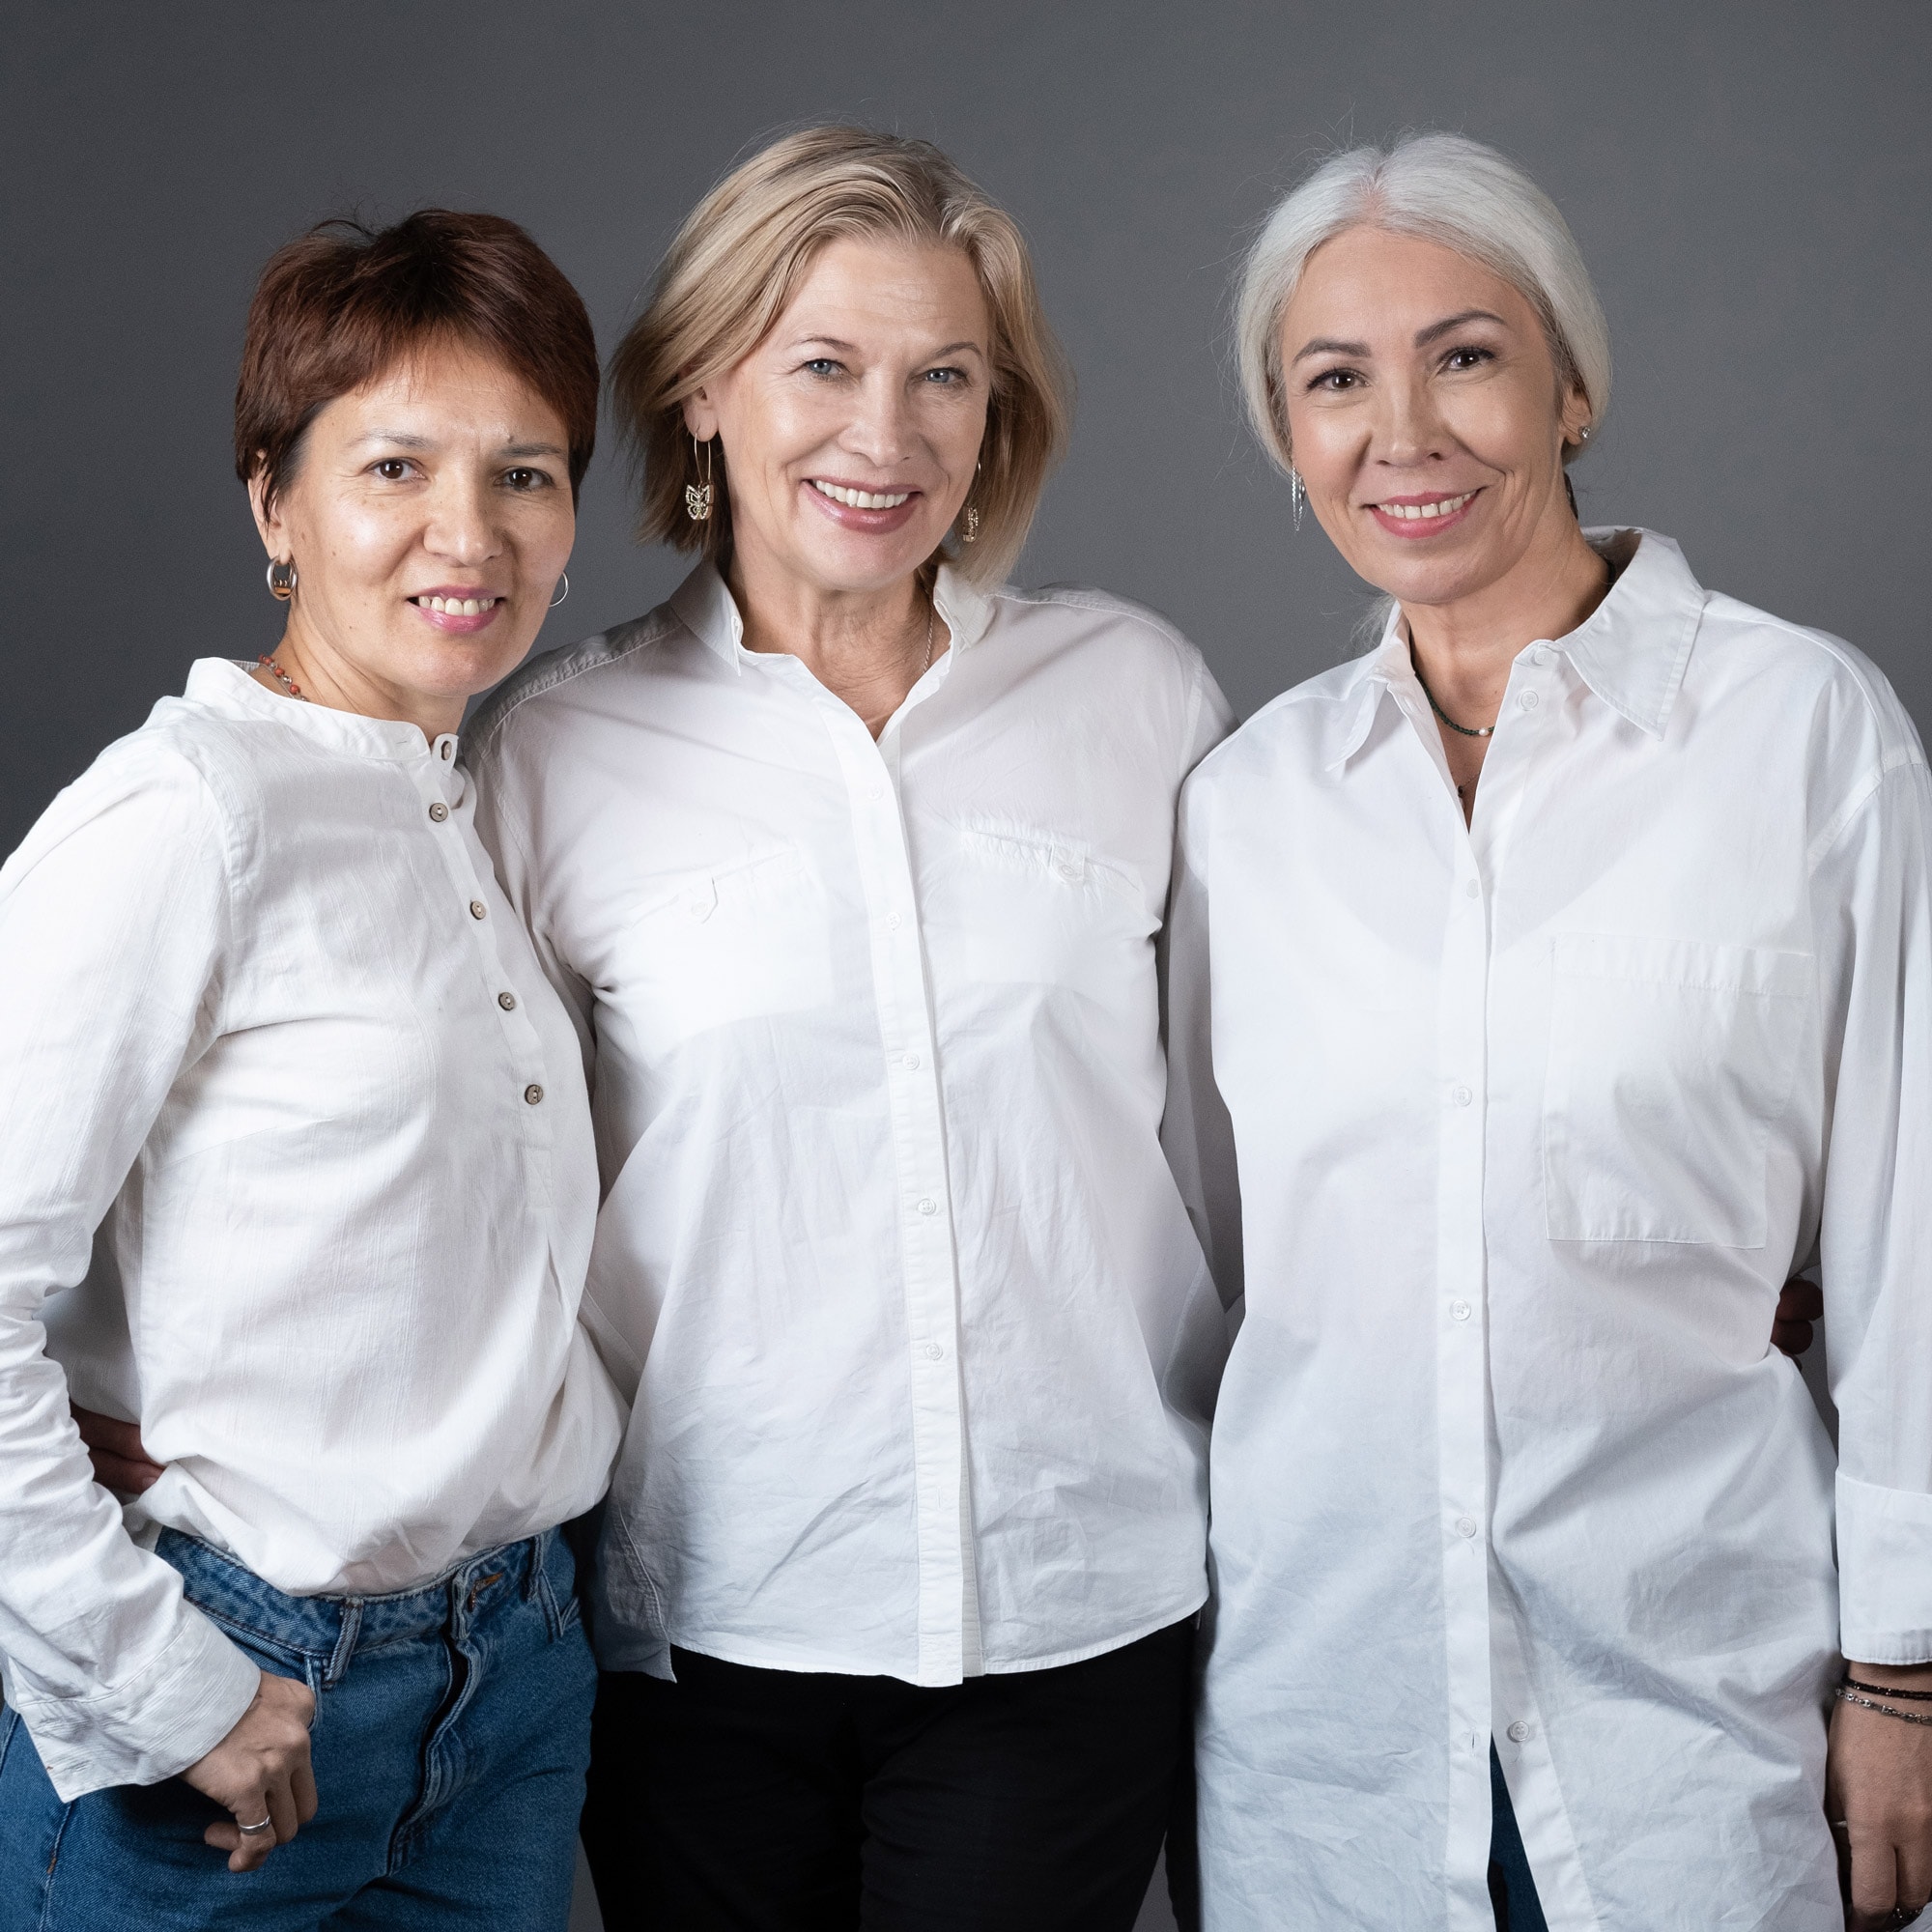 InMode’s Forma V provides Breast Cancer Survivors dramatic relief from intense vaginal dryness and recurrent UTIs